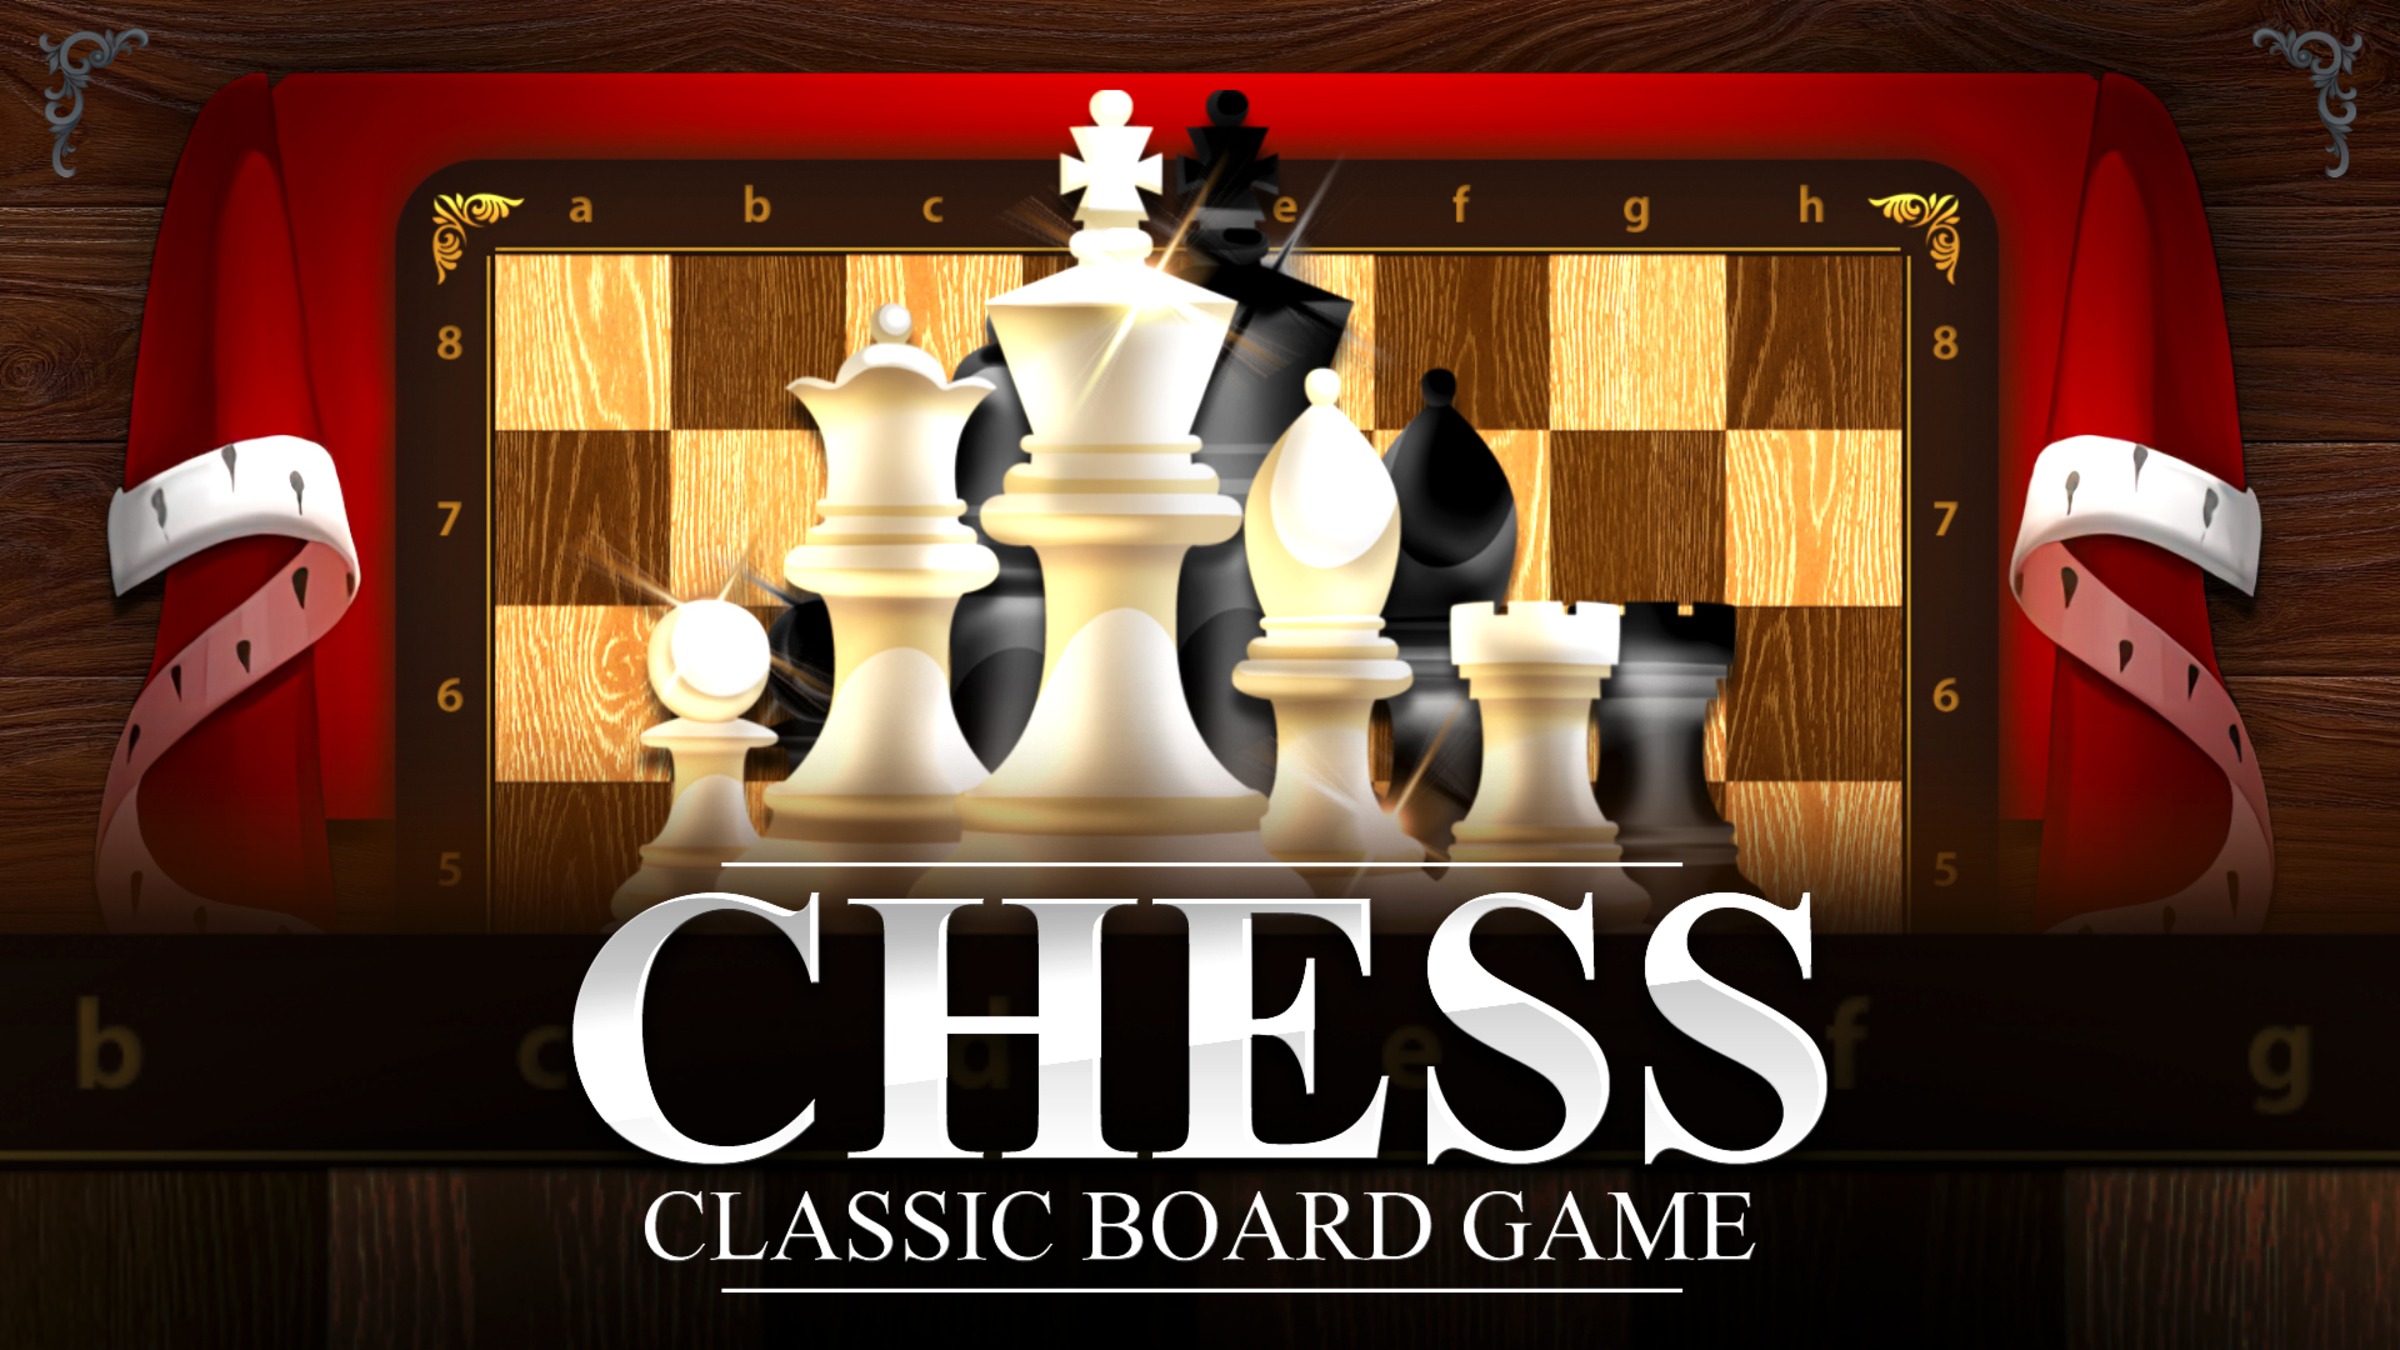 https://assets.nintendo.com/image/upload/c_fill,w_1200/q_auto:best/f_auto/dpr_2.0/ncom/en_US/games/switch/c/chess-classic-board-game-switch/